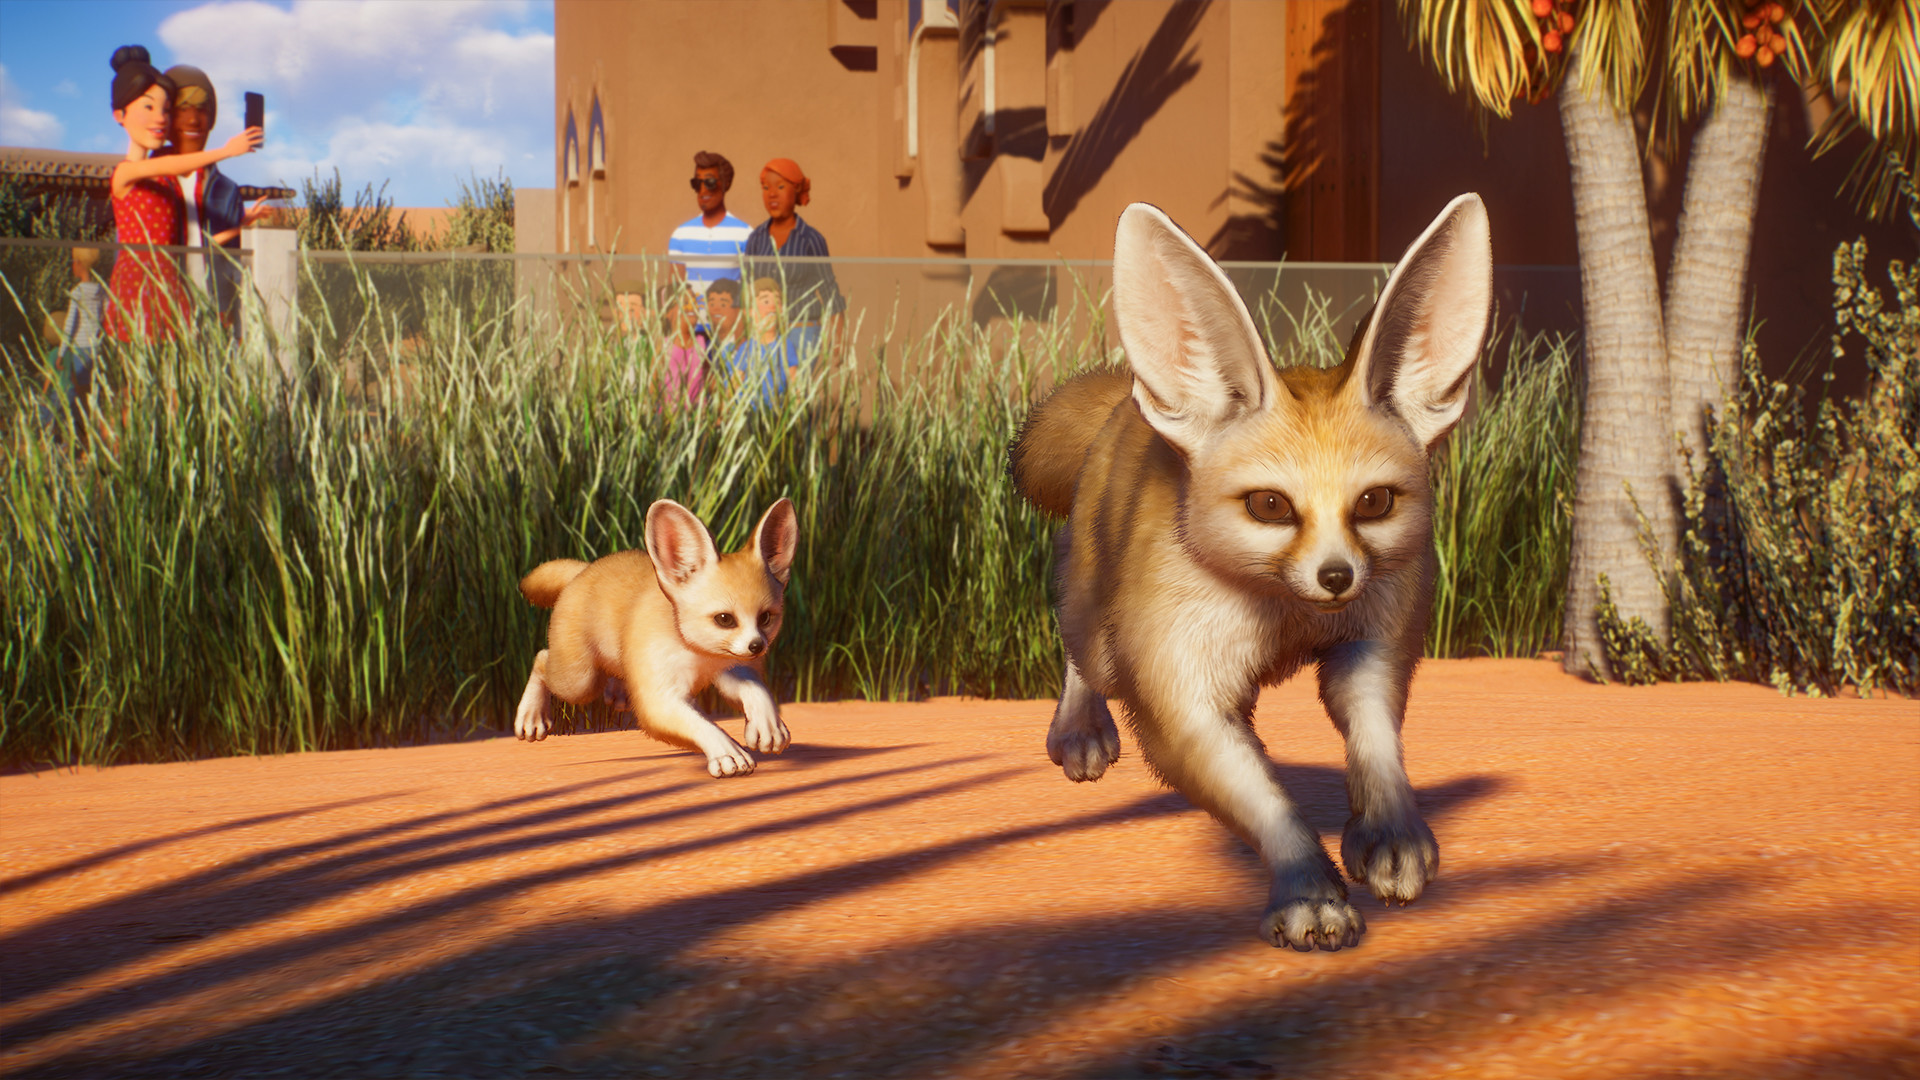 Planet Zoo: Africa Pack on Steam